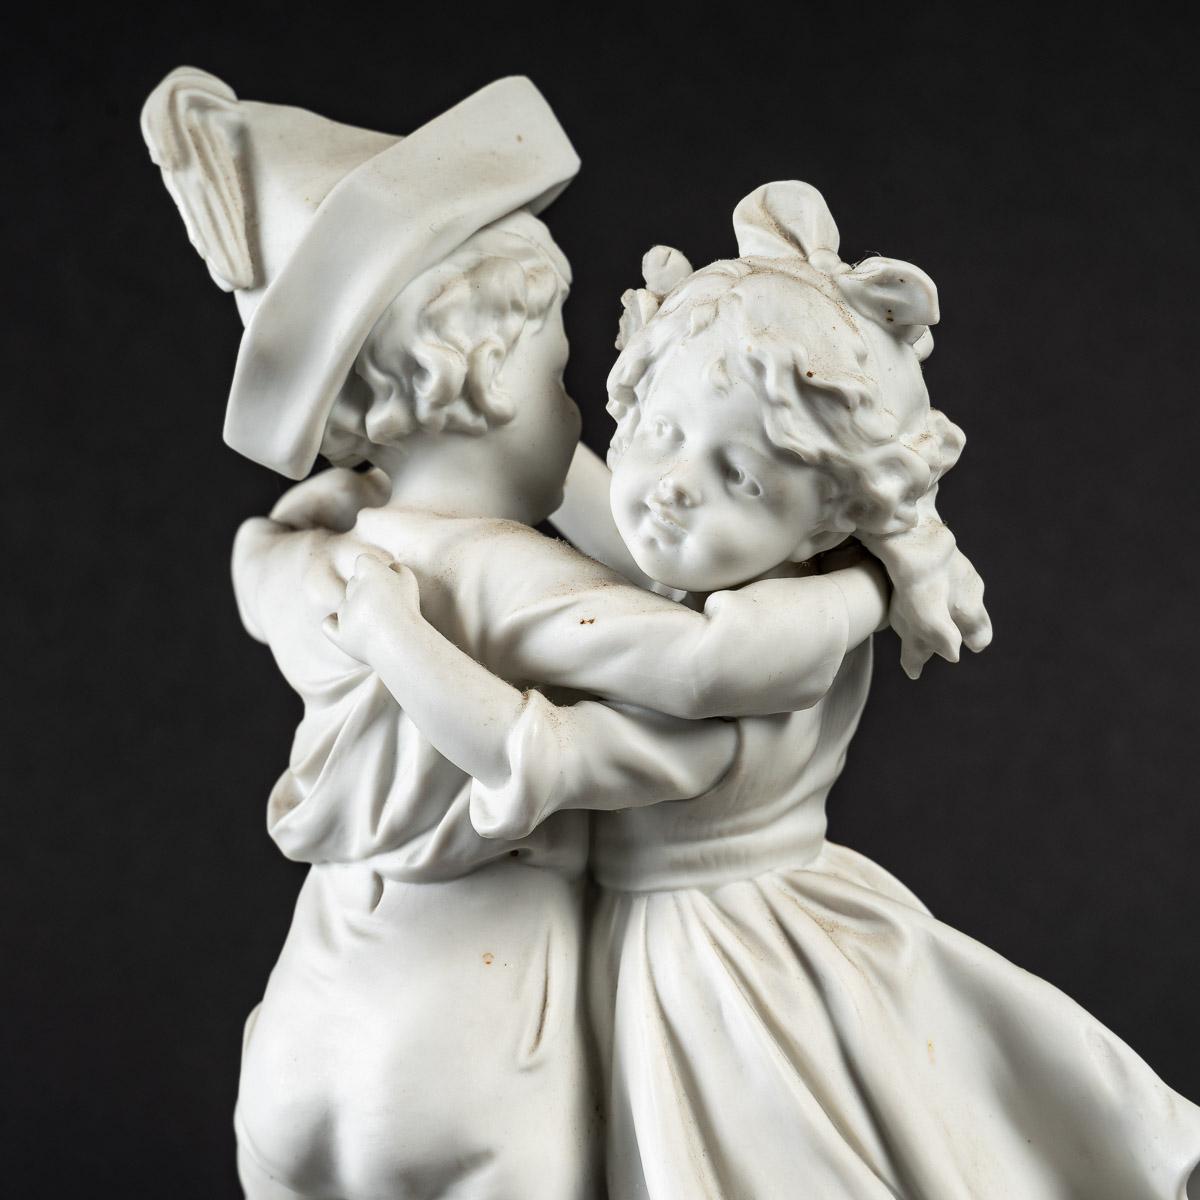 European Pair of small Biscuit sculptures, early 20th century